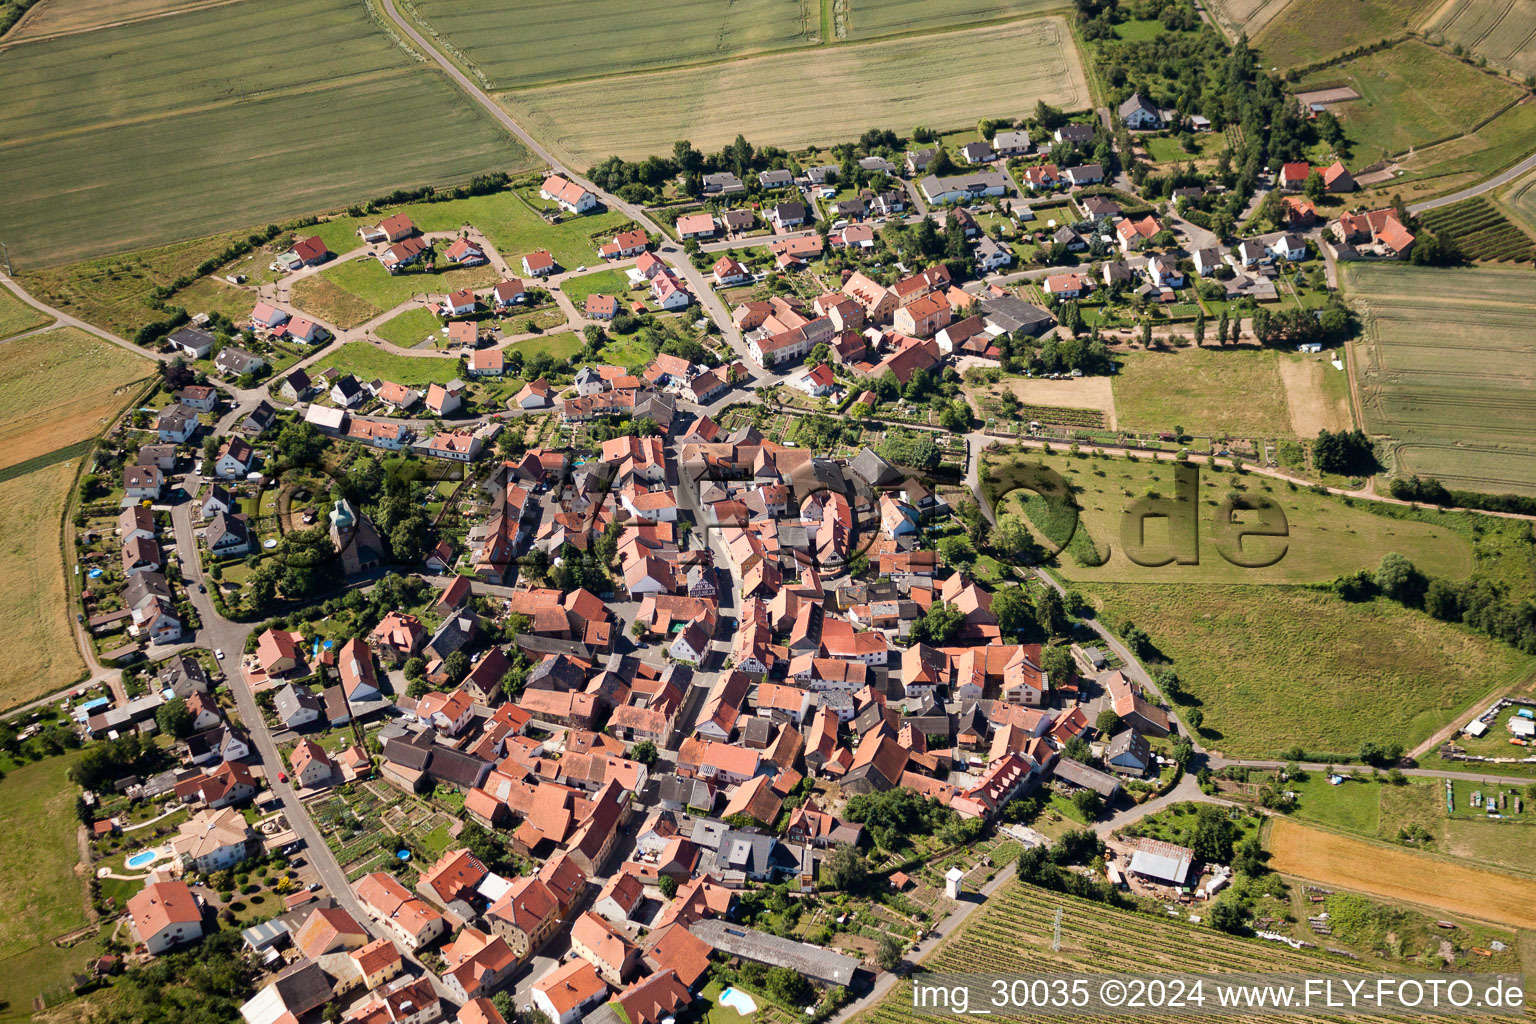 Aerial view of Village - view on the edge of agricultural fields and farmland in the district Neudorferhof in Duchroth in the state Rhineland-Palatinate